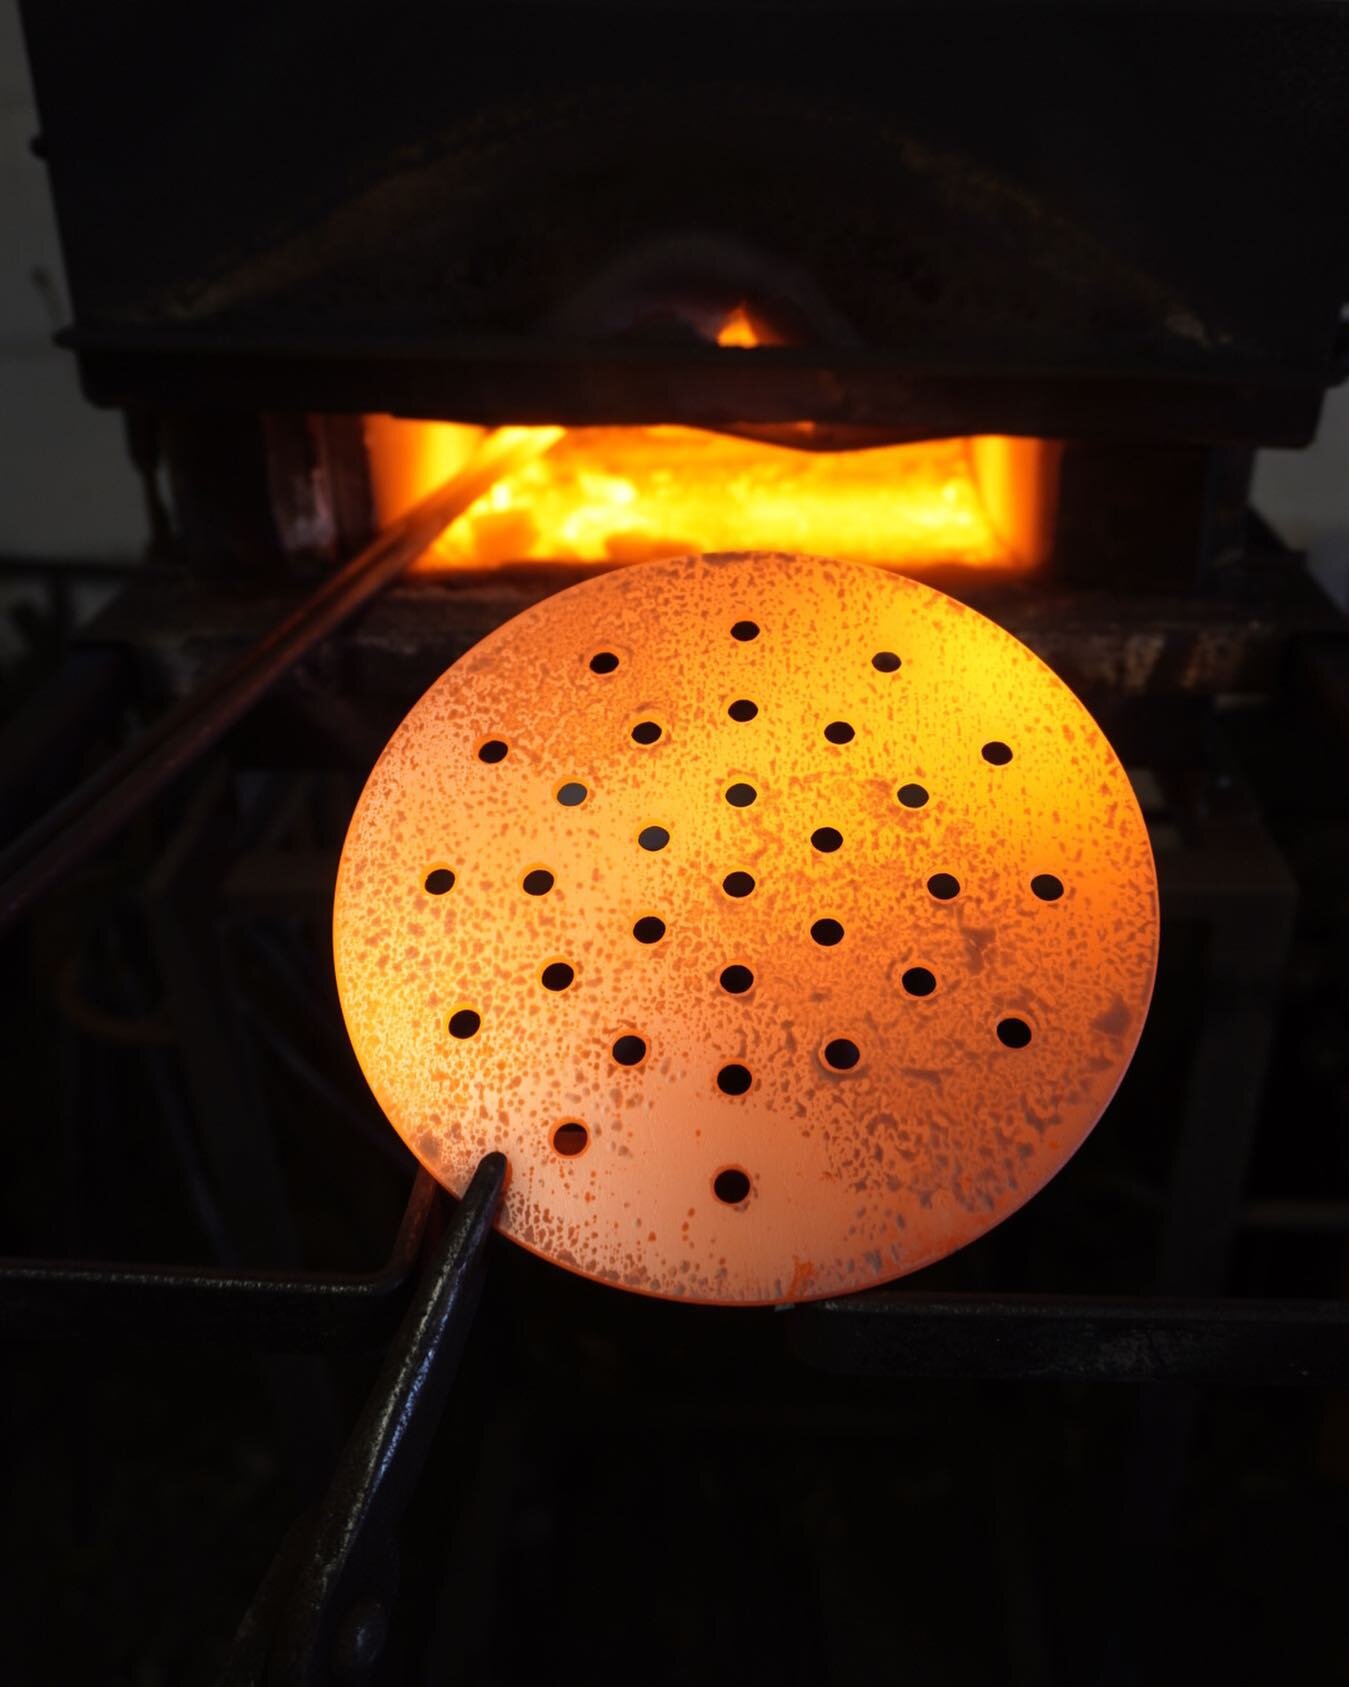 A Cosy Shot from last week!
Chestnut Roaster pan before Dishing. 

#hot #metal #redhot #contrast #forge #gasforge #forging #blacksmith #blacksmithing #crafts #craft #handmade #making #creating #hotsteel #glowing #heat #fire #holes #pan #dish #process